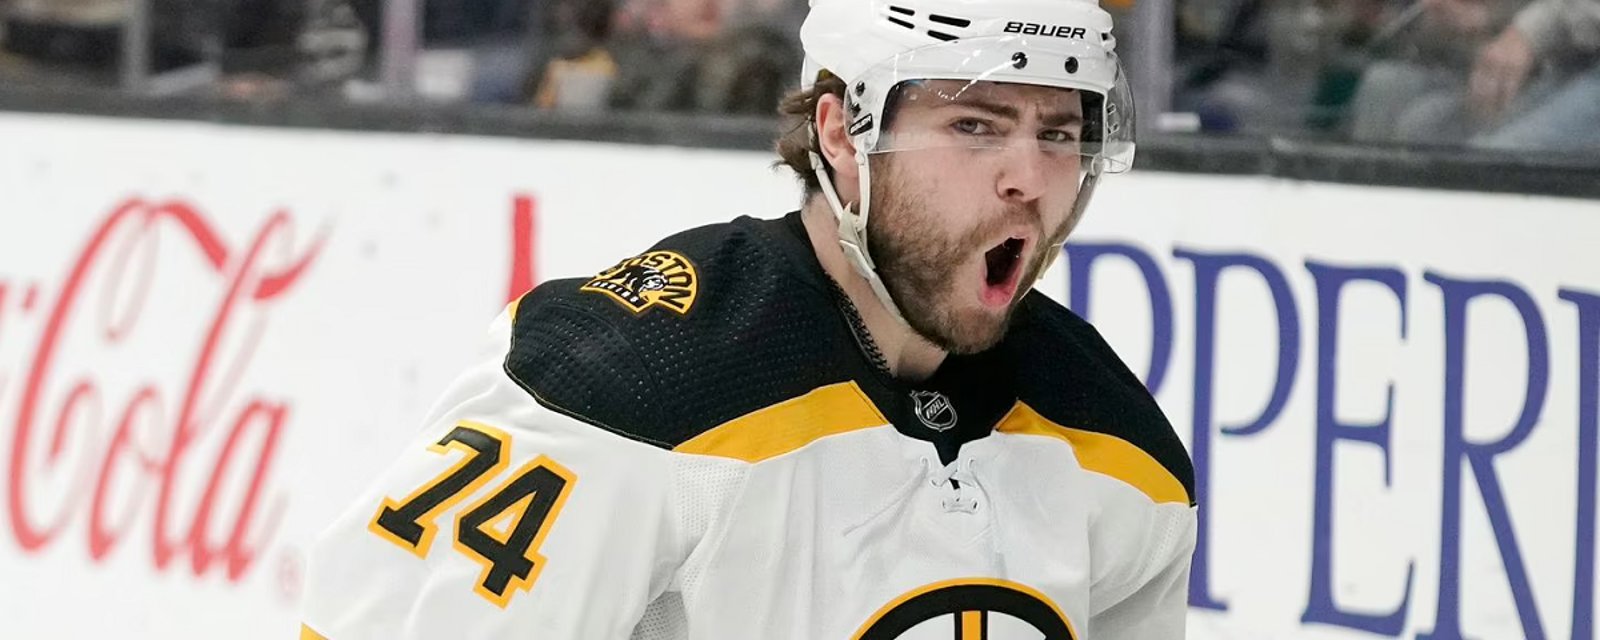 Last minute updates on Lucic and DeBrusk ahead of tonight's game.